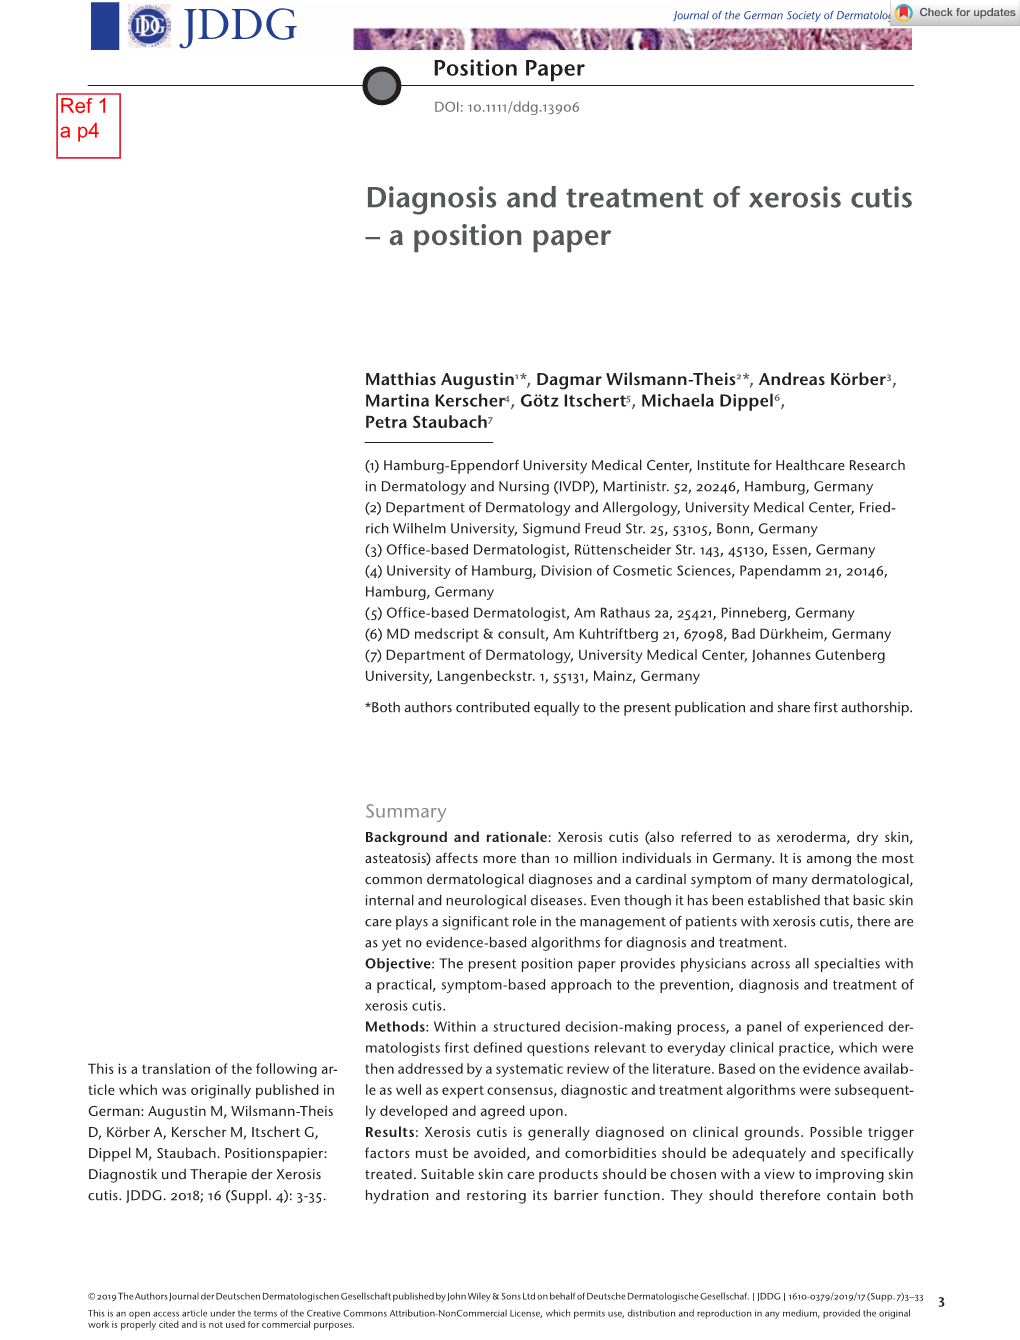 Diagnosis and Treatment of Xerosis Cutis – a Position Paper